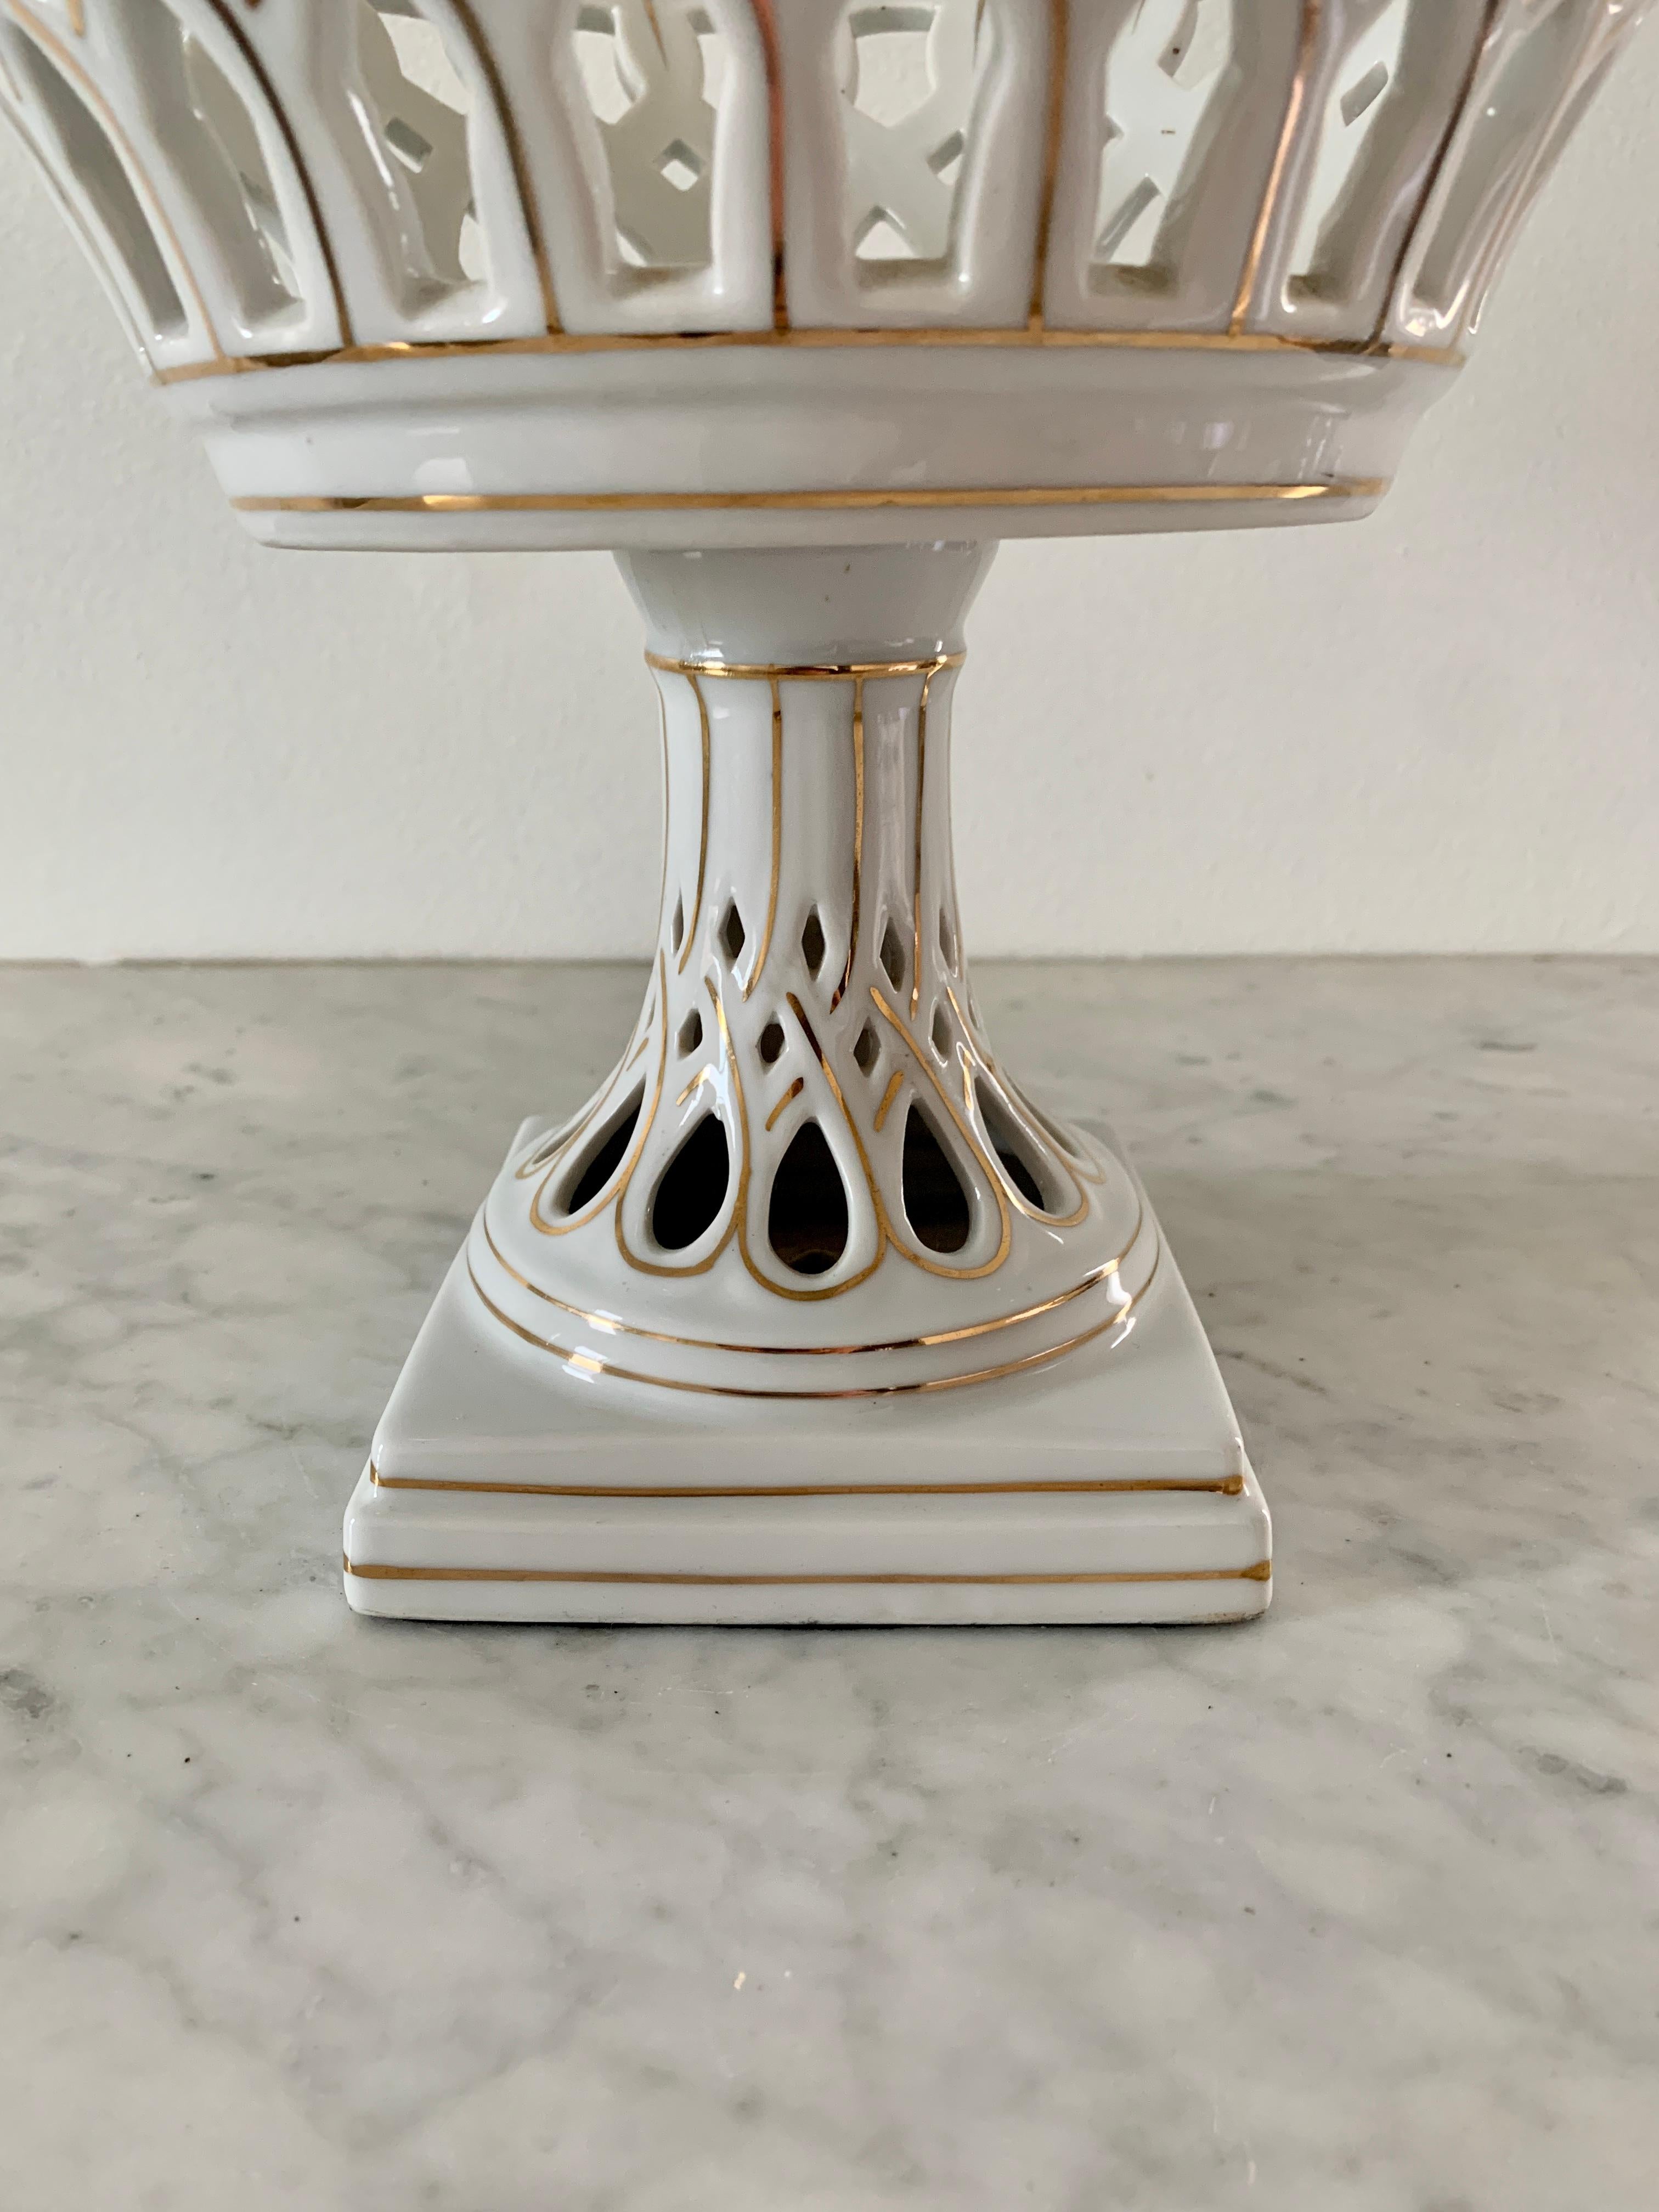 Regency Reticulated White Porcelain and Gold Gilt Basket Compote For Sale